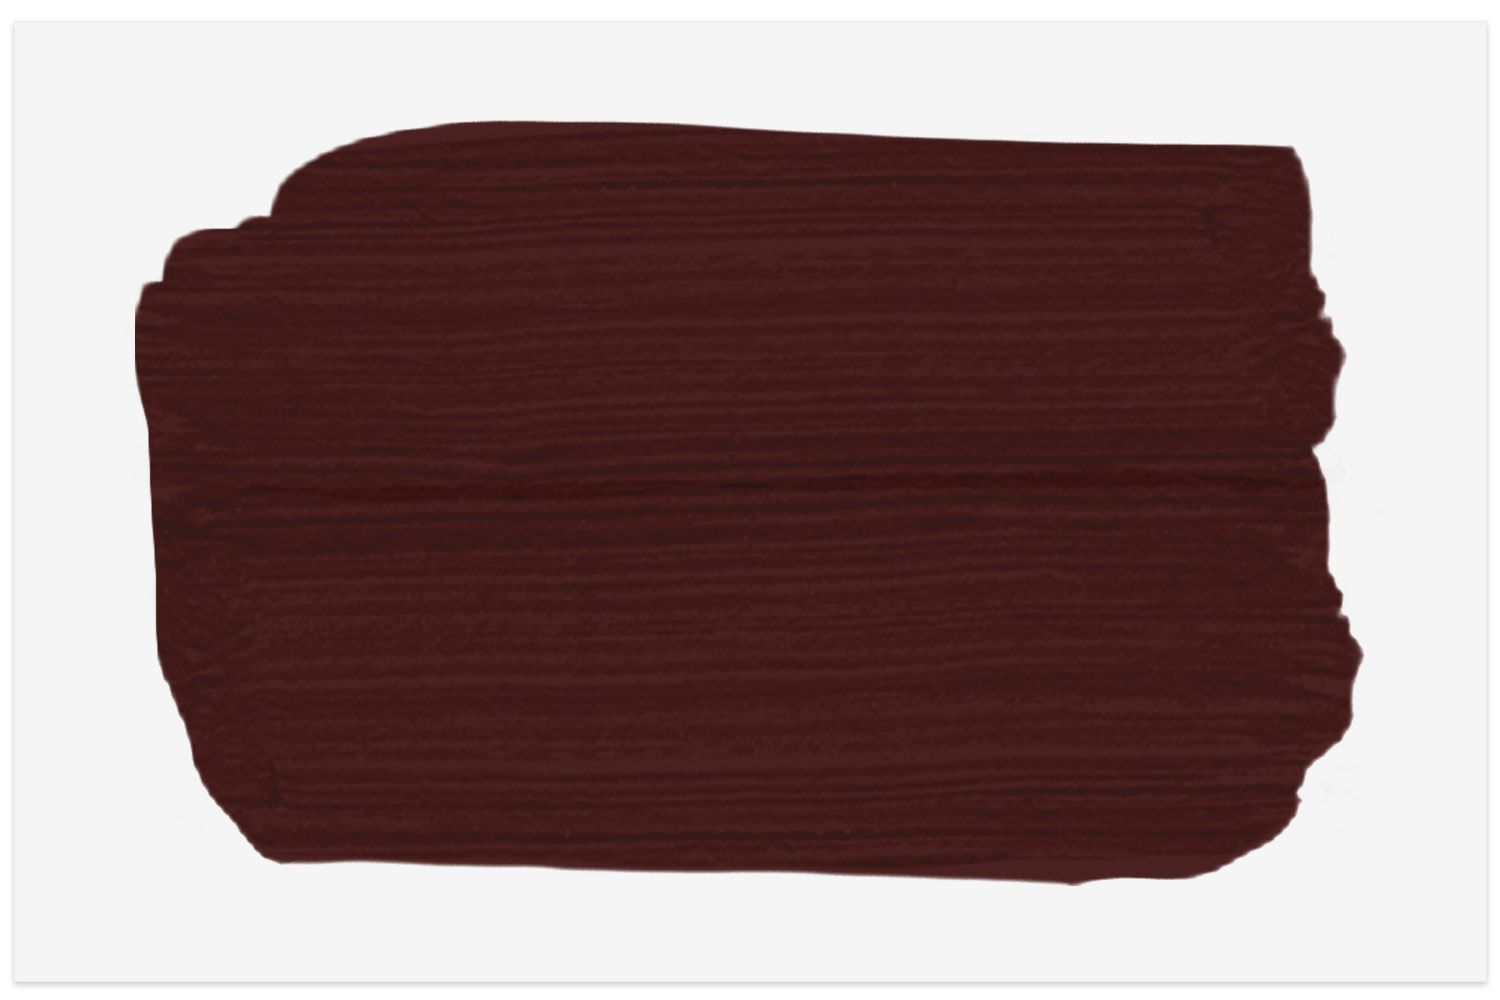 Rockwood Red paint swatch from Sherwin-Williams